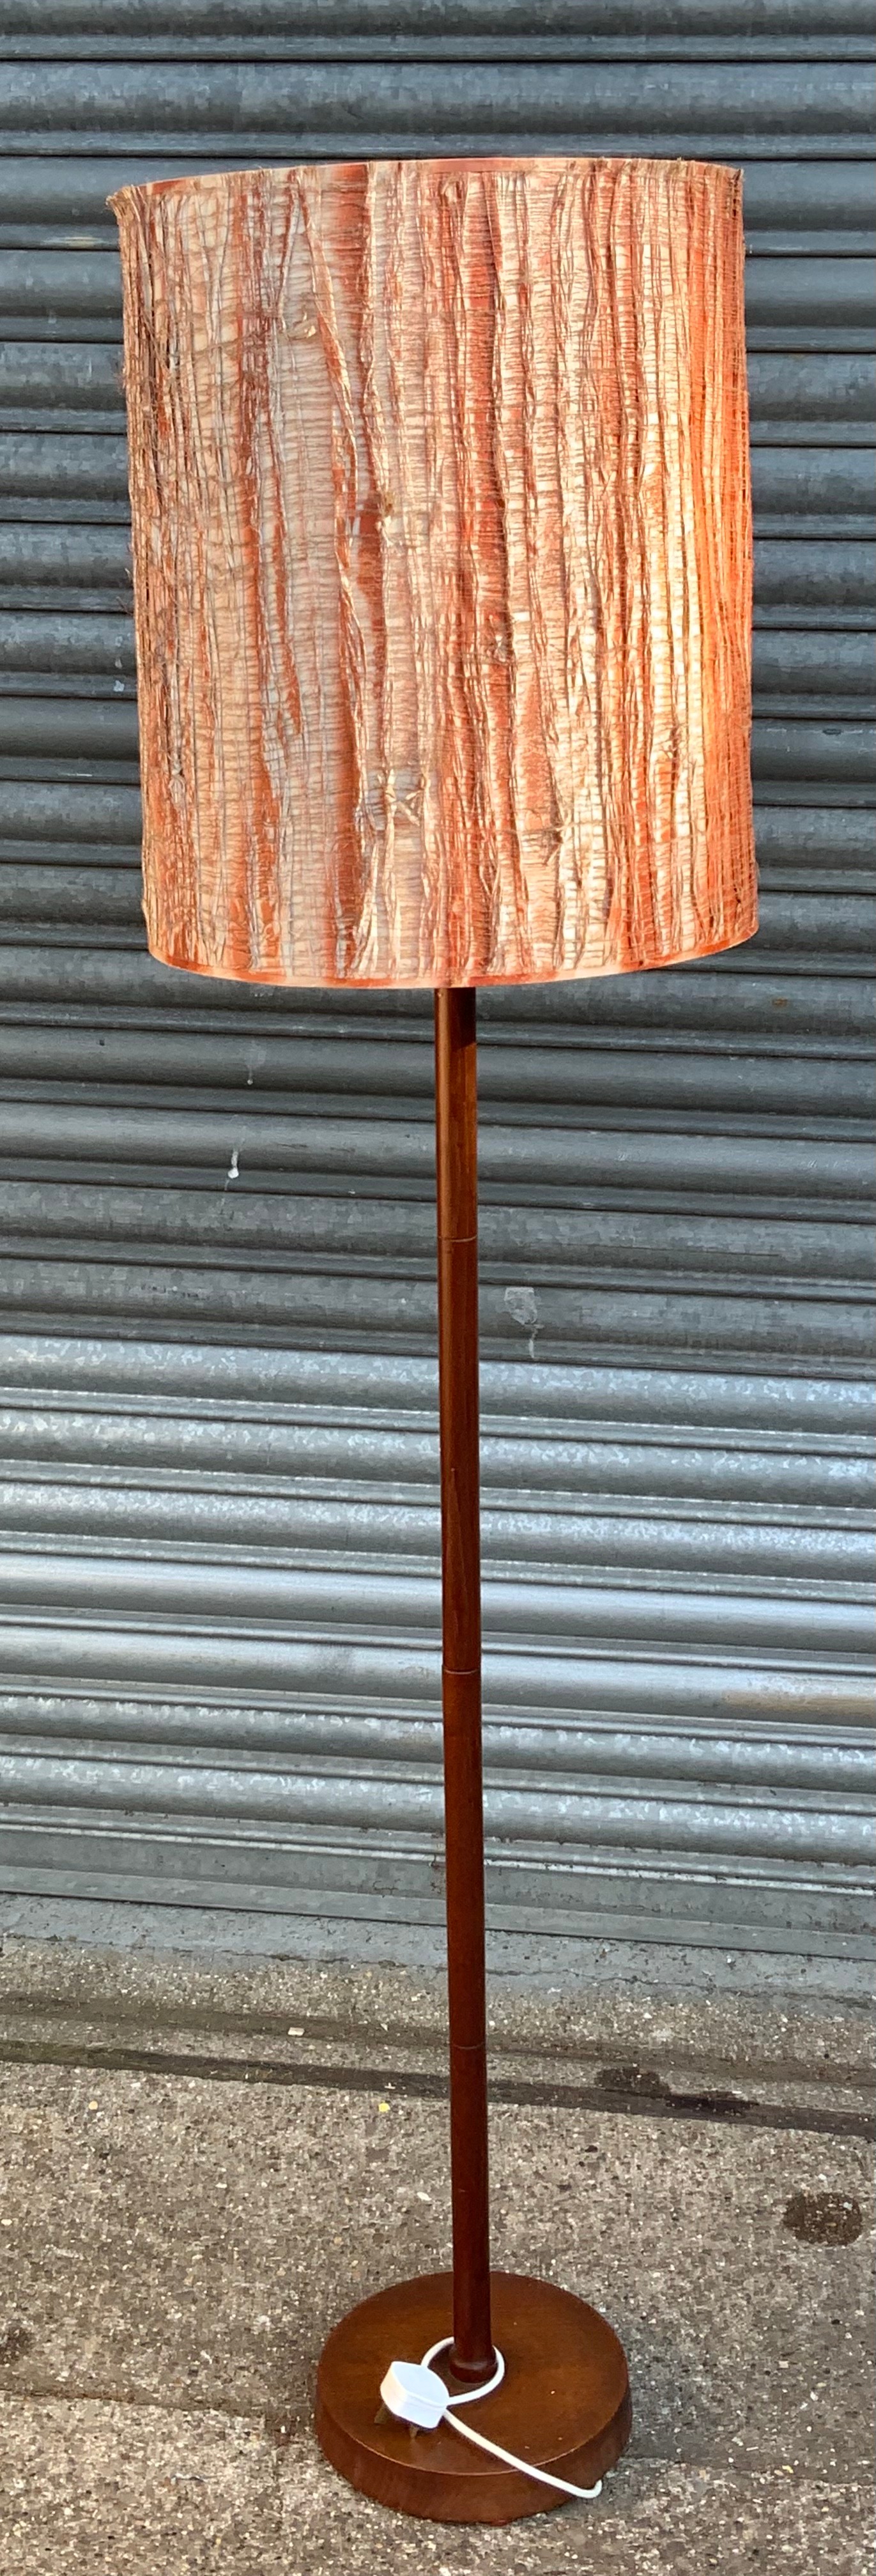 Standard Lamp with Retro Shade